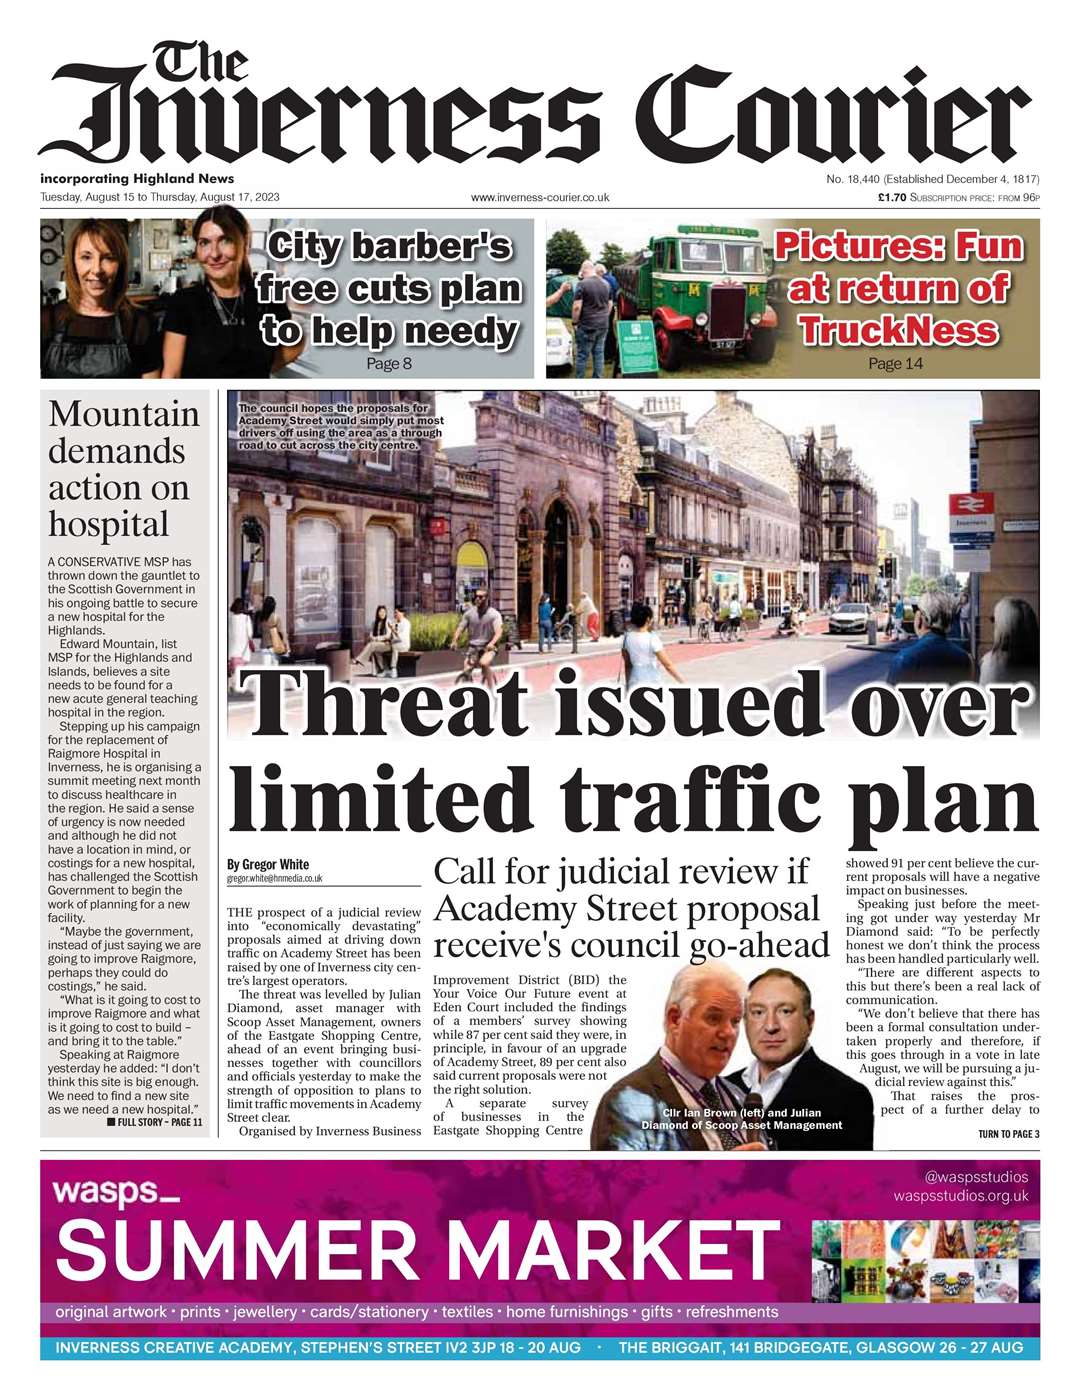 The Inverness Courier, August 15, front page.